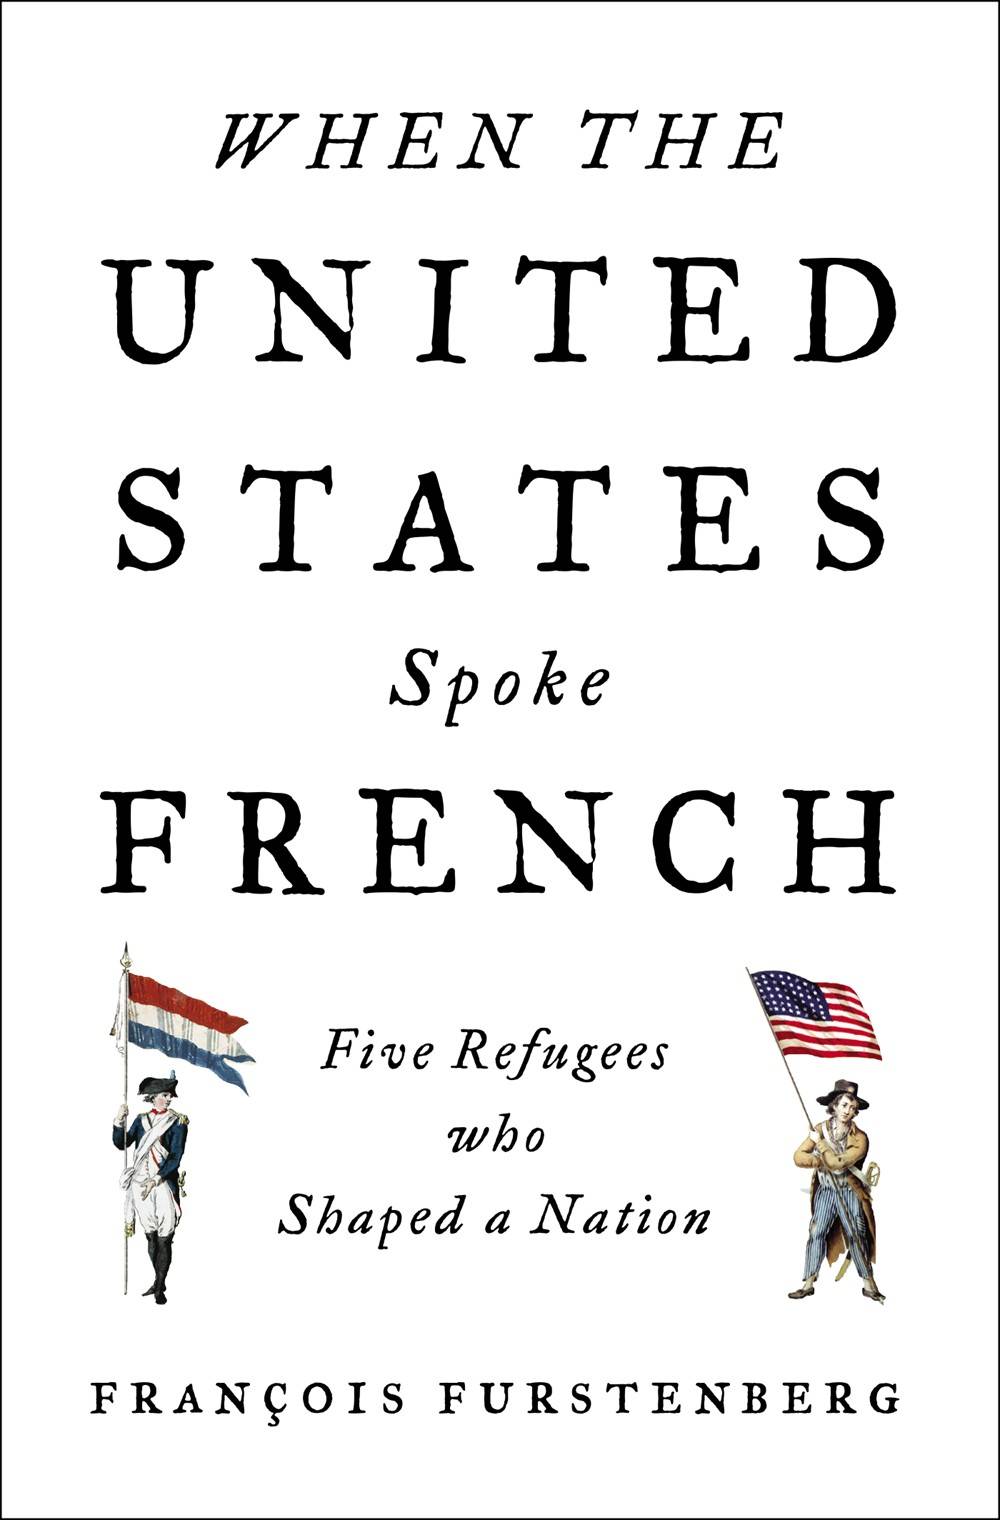 when the united states spoke french